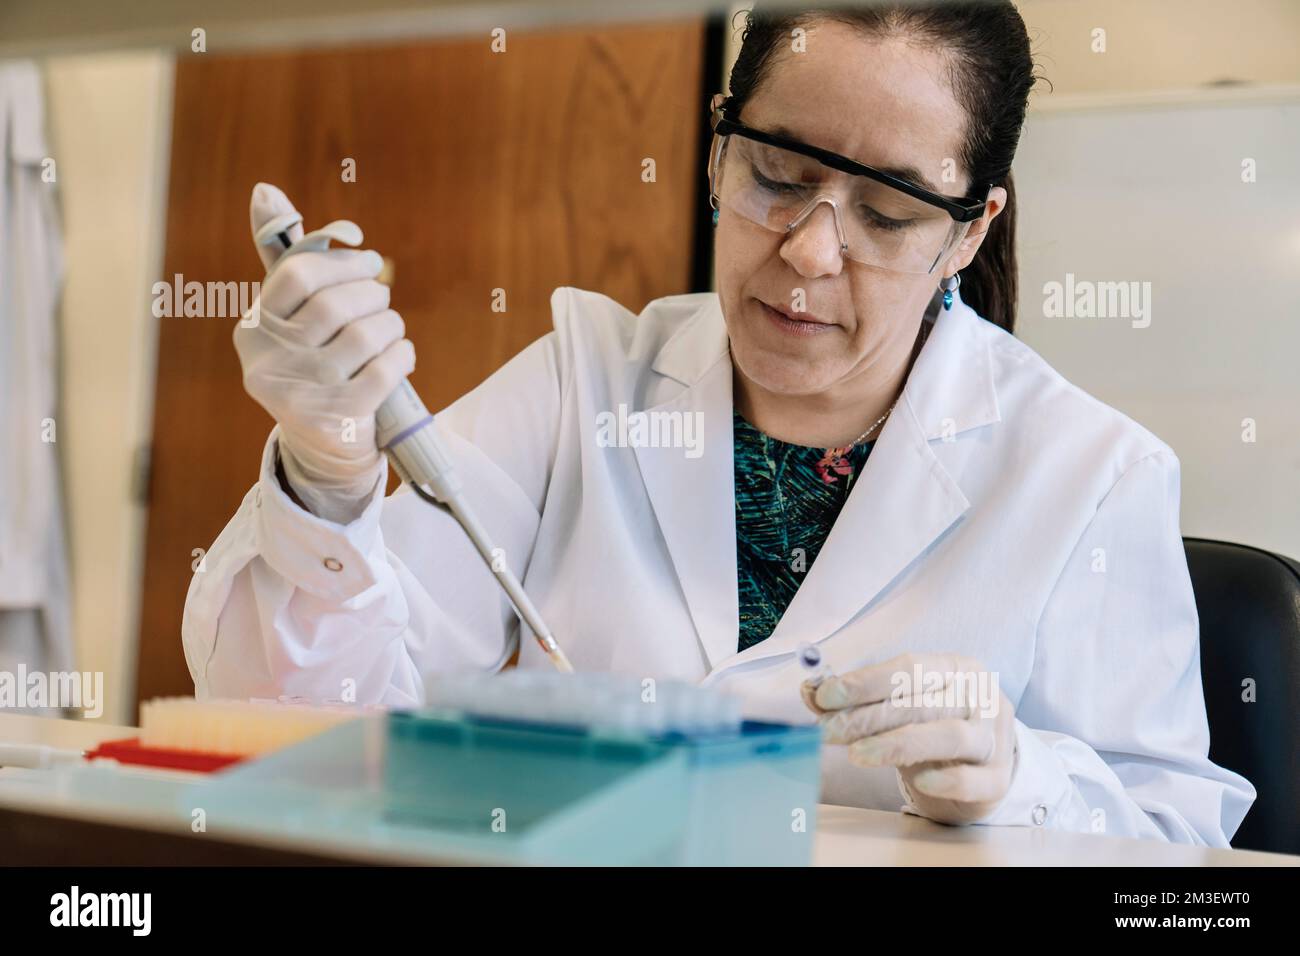 Scientist pipetting samples into eppendorf tubes Stock Photo